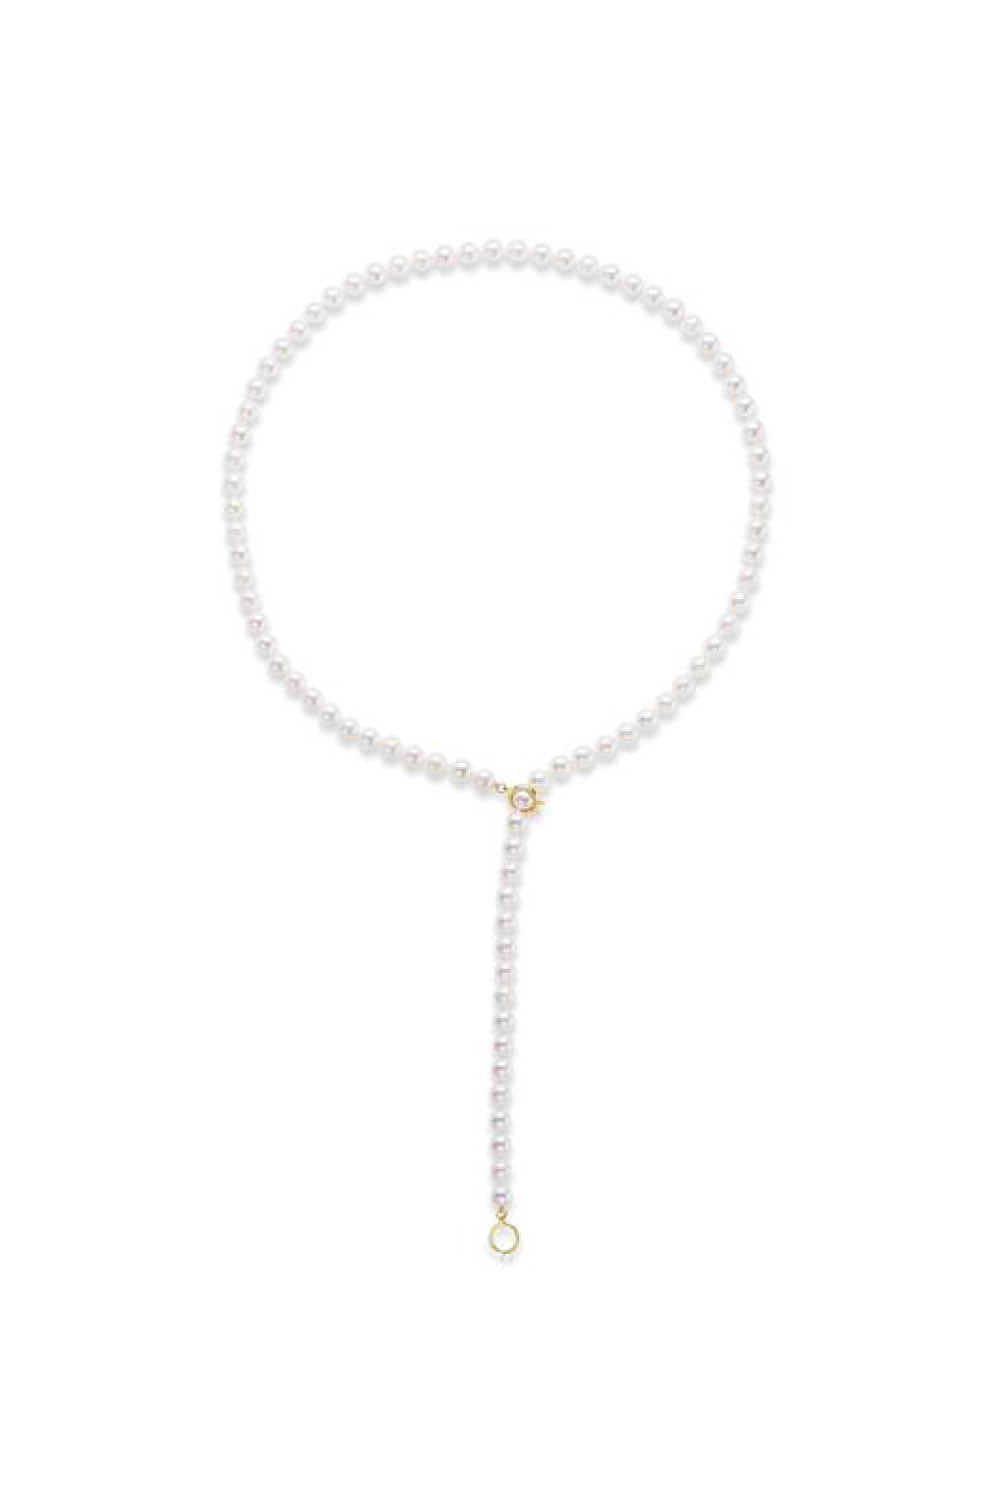 Akoya Pearl Adjustable Lariat Necklace in Yellow Gold